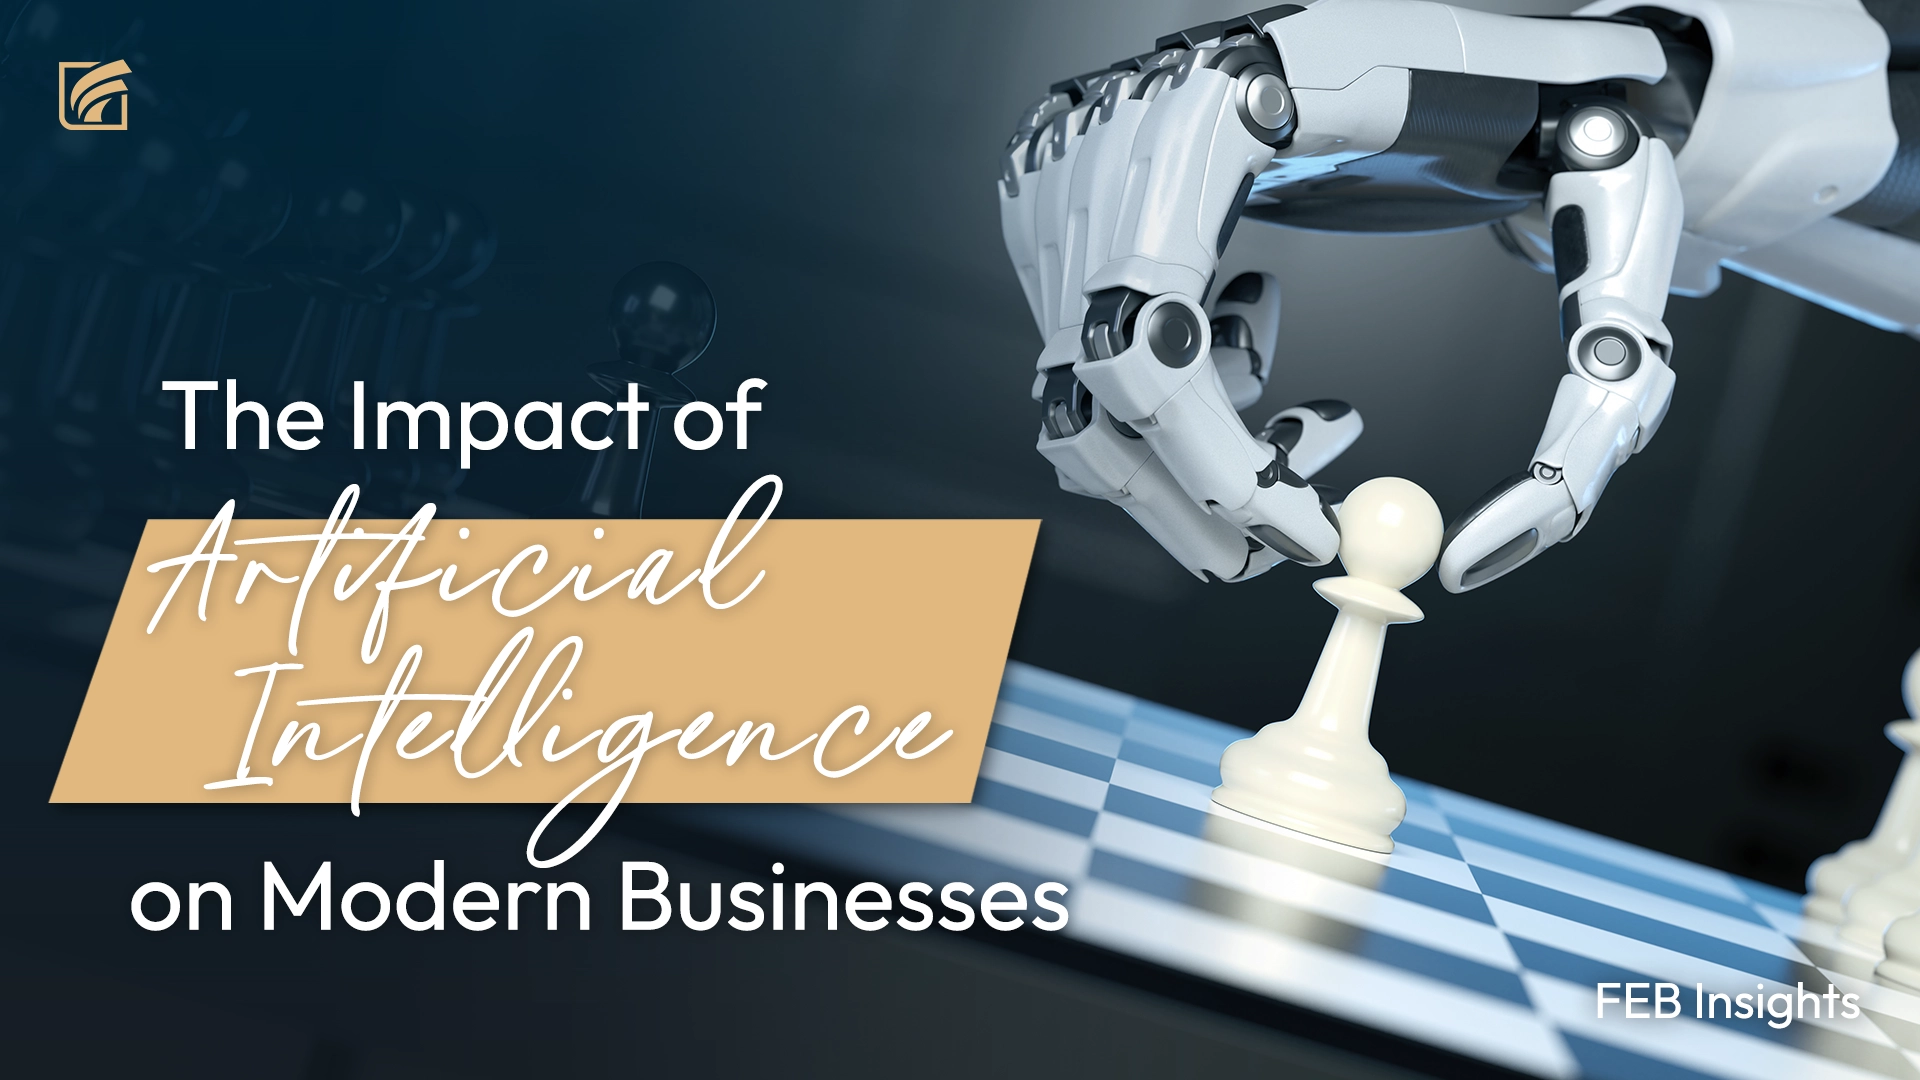 The Impact of Artificial Intelligence on Modern Businesses